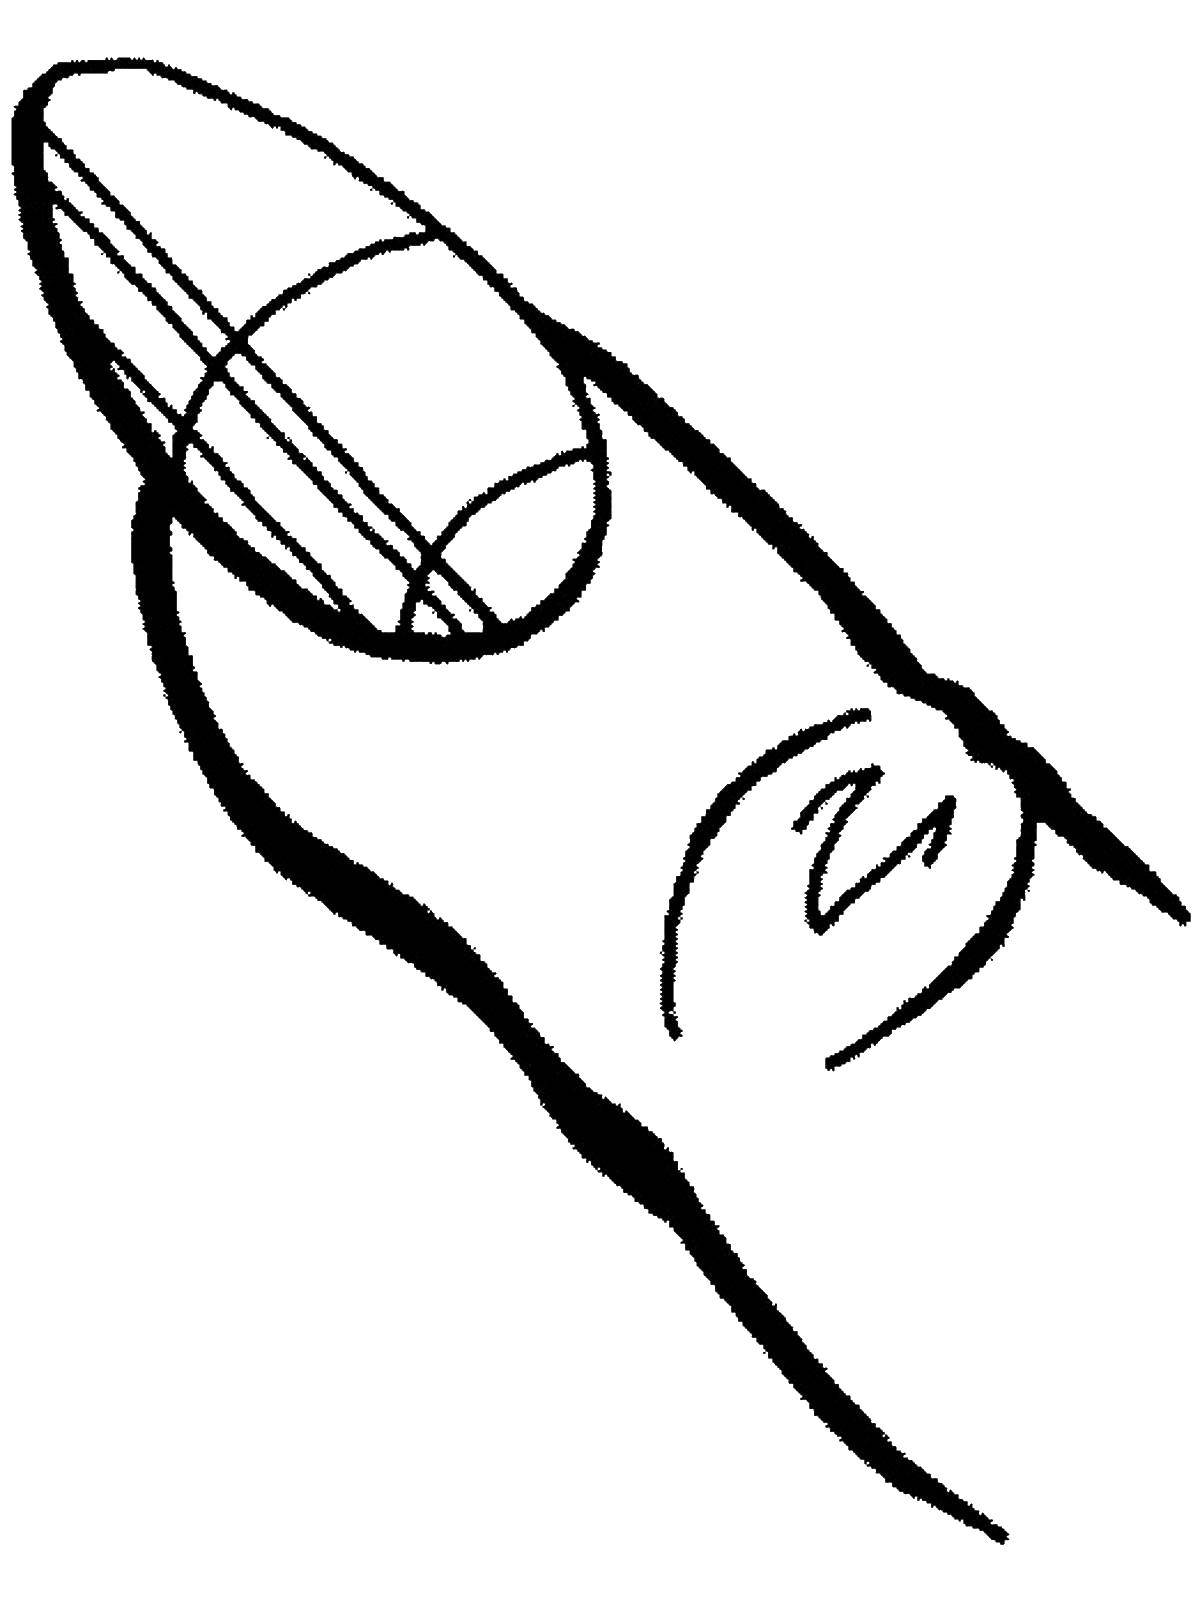 Coloring Thumb nail. Category The structure of the body. Tags:  Finger nail.